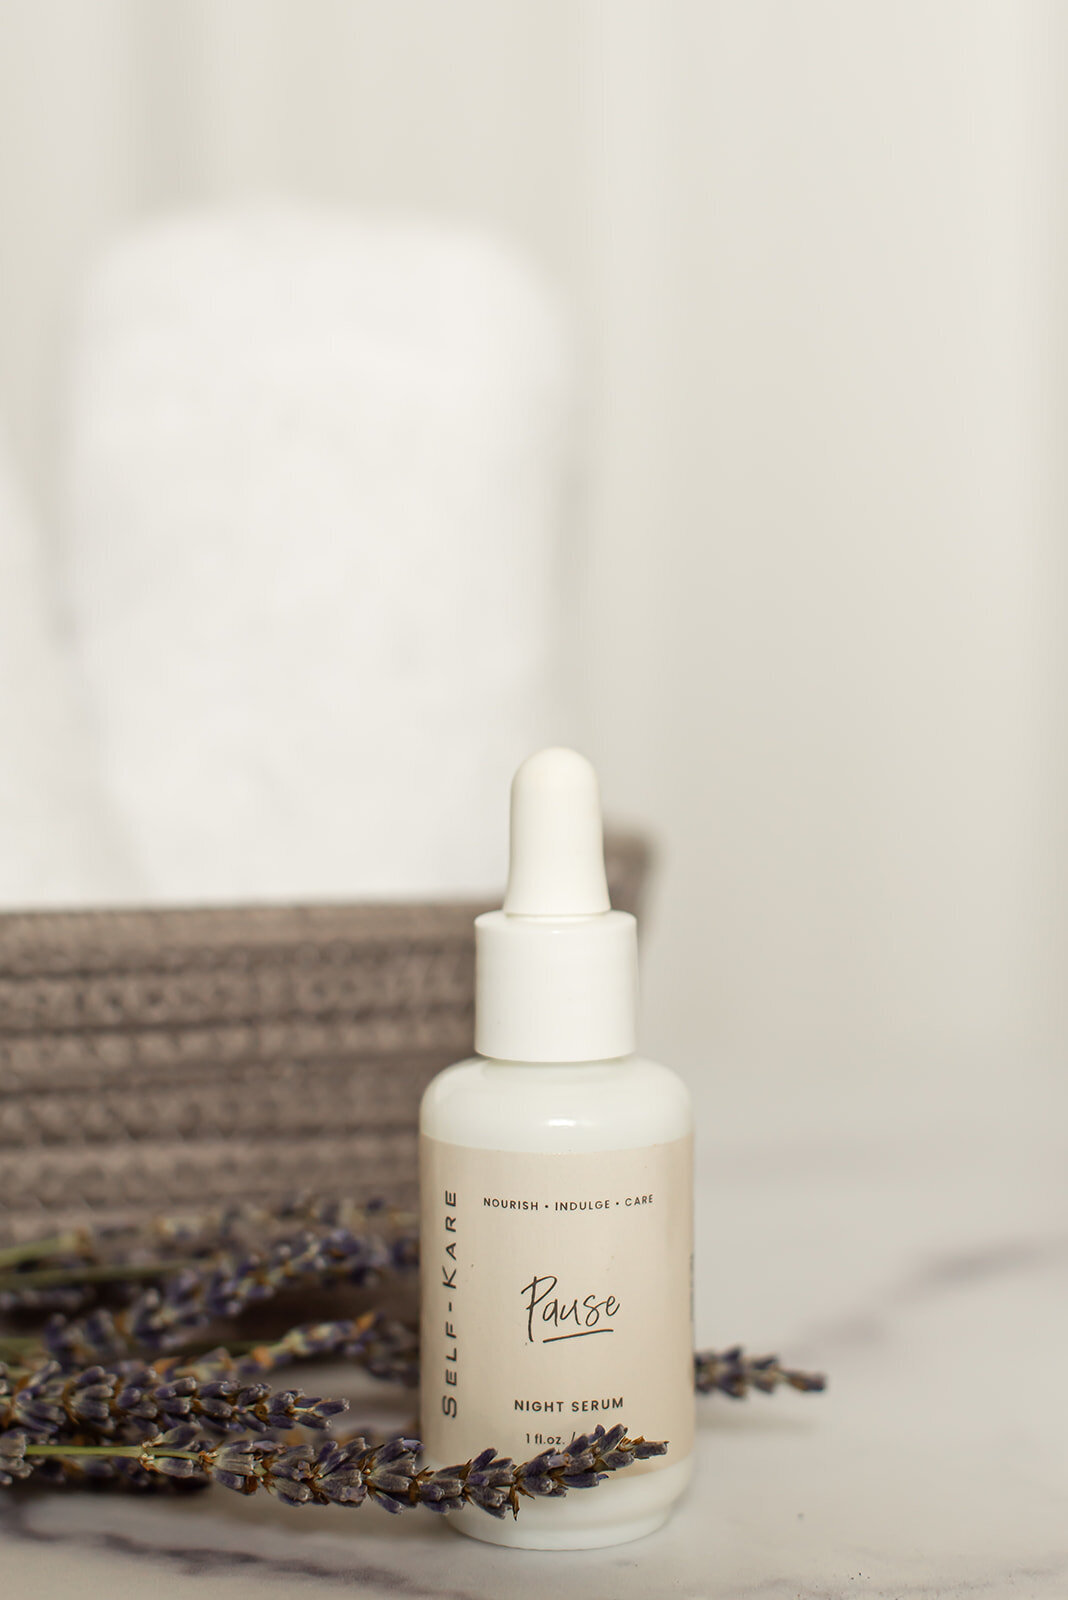 Facial toner with dried lavender and spa towels